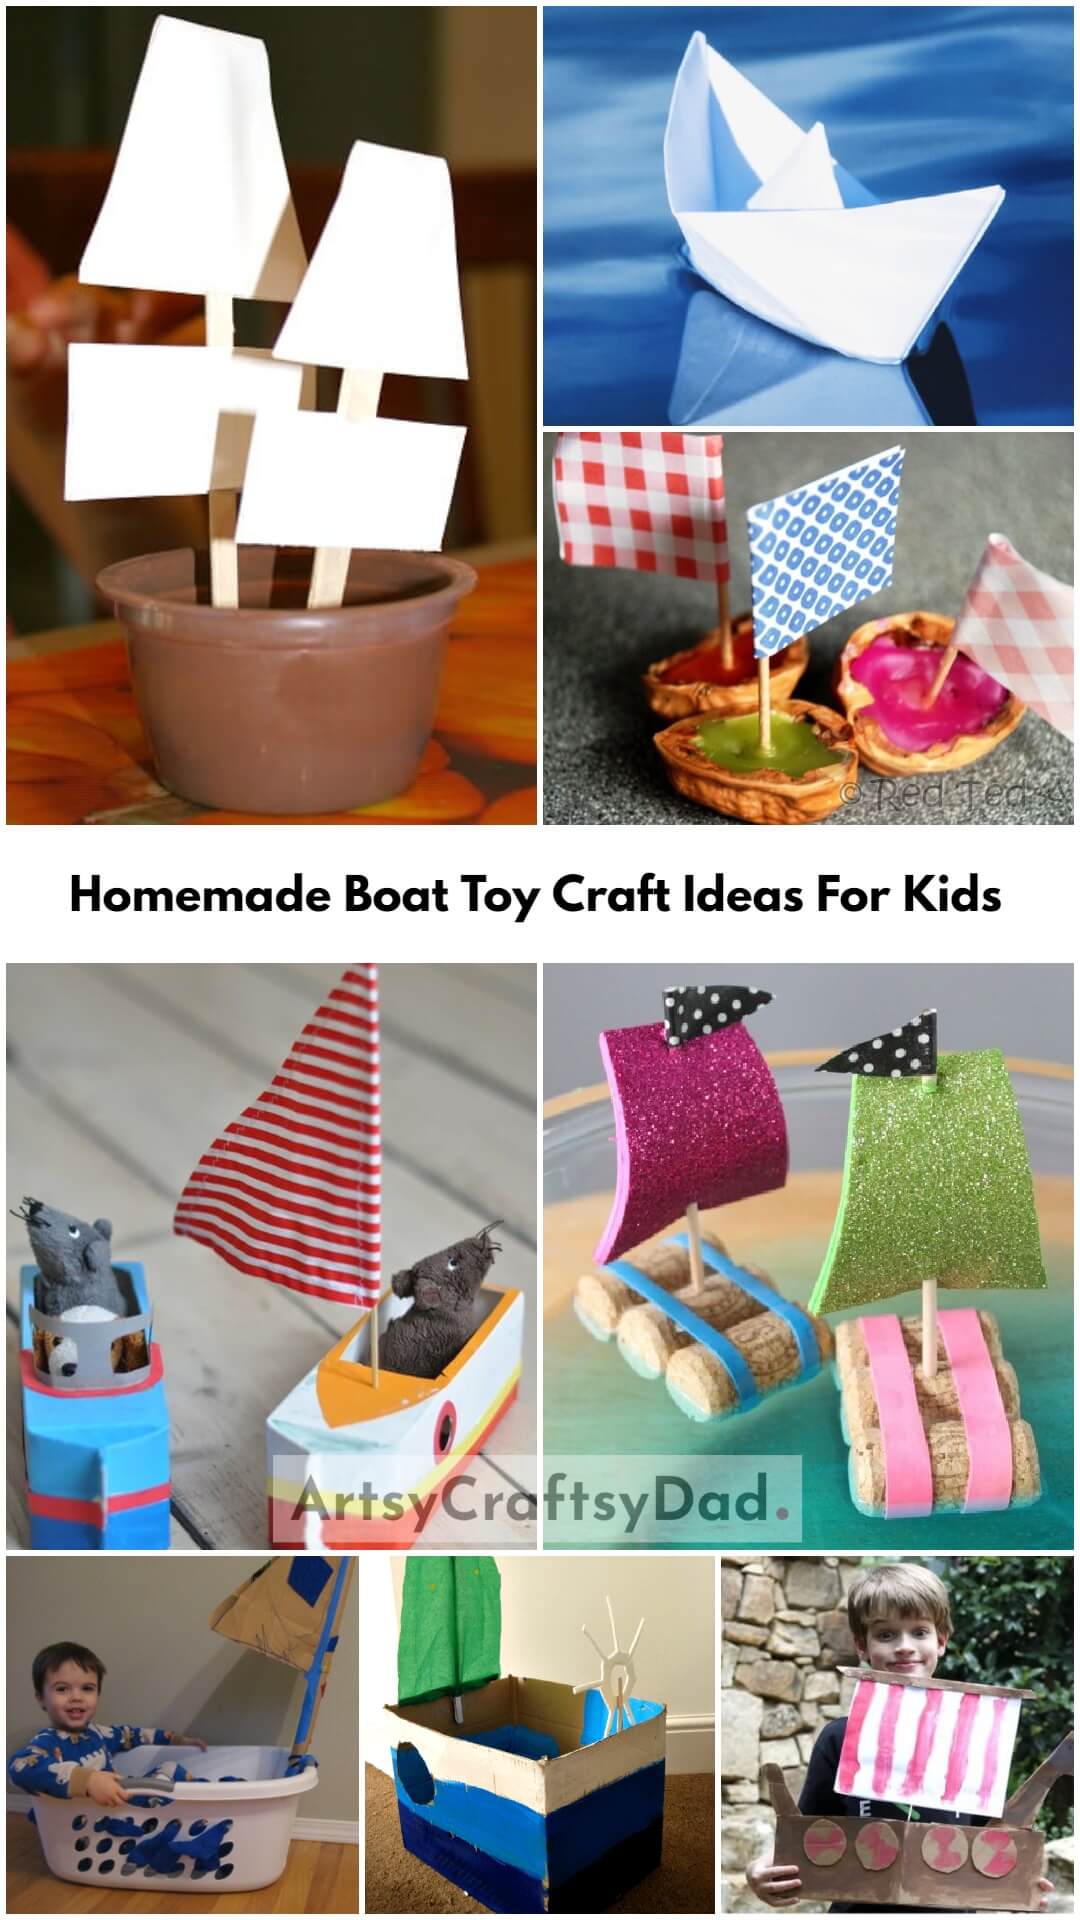 Homemade Boat Toy Craft Ideas For Kids